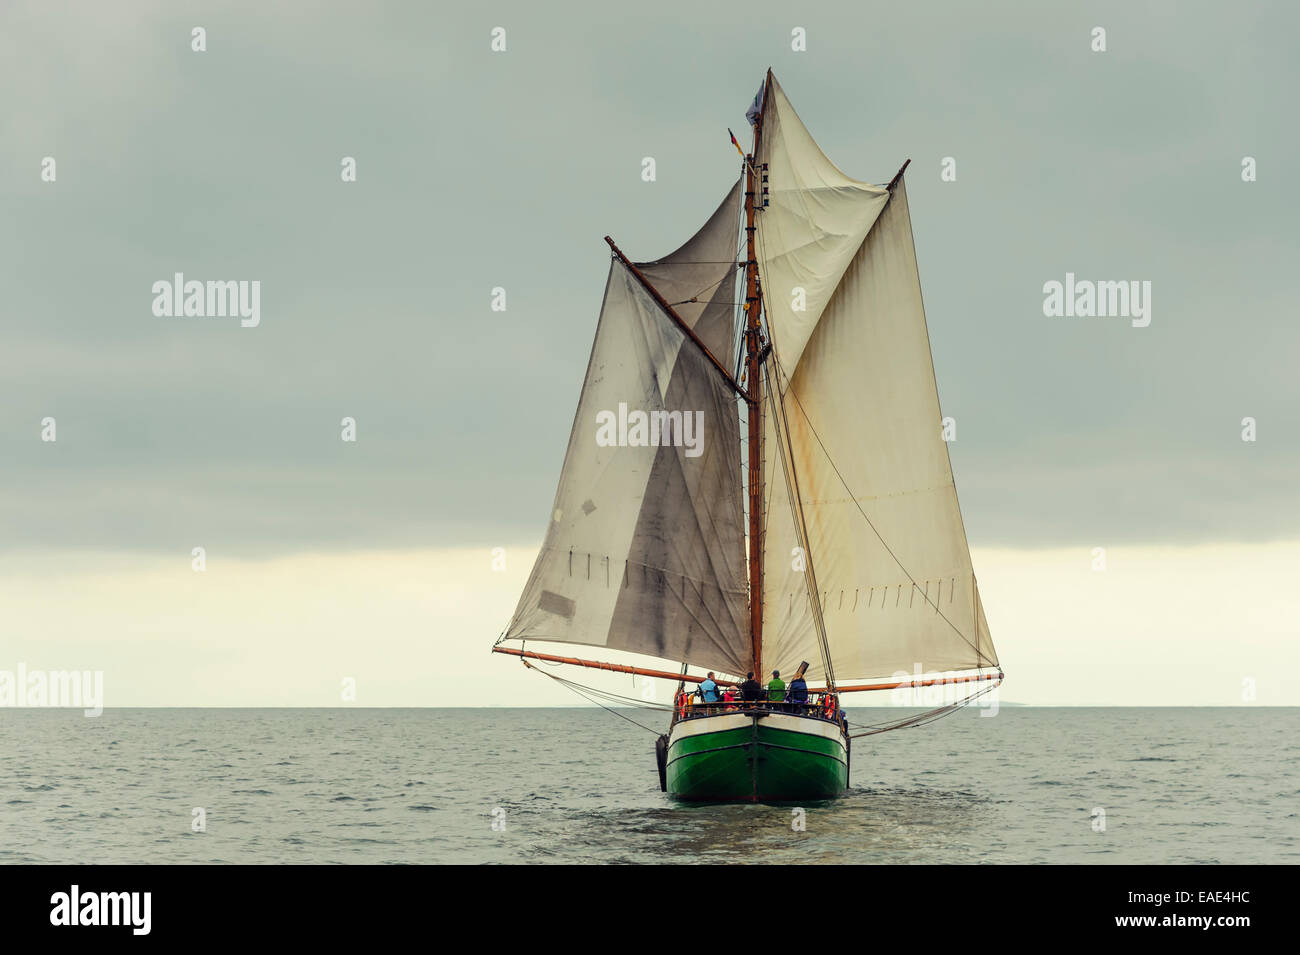 Gaff-rigged schooner with the sails in the butterfly position, Baltic Sea, Mecklenburg-Western Pomerania, Germany Stock Photo